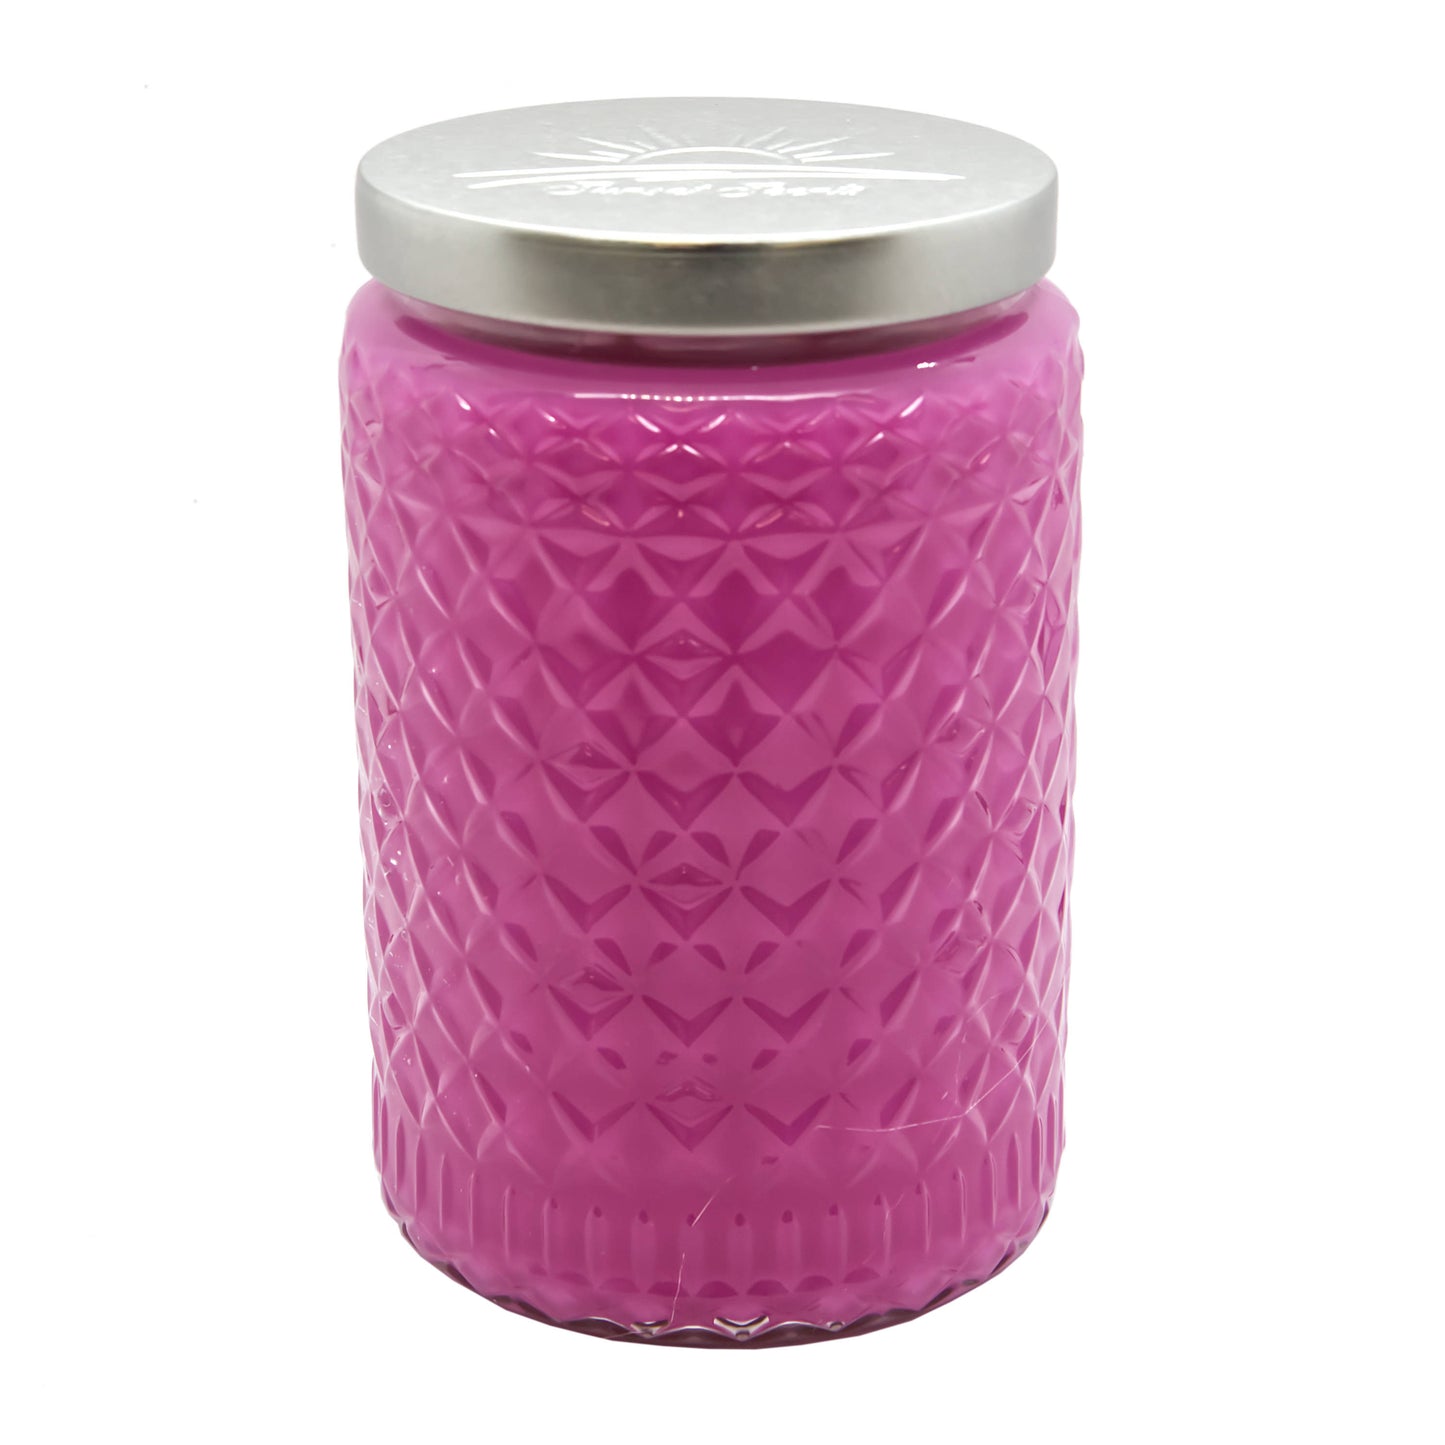 Peony Scented Candle